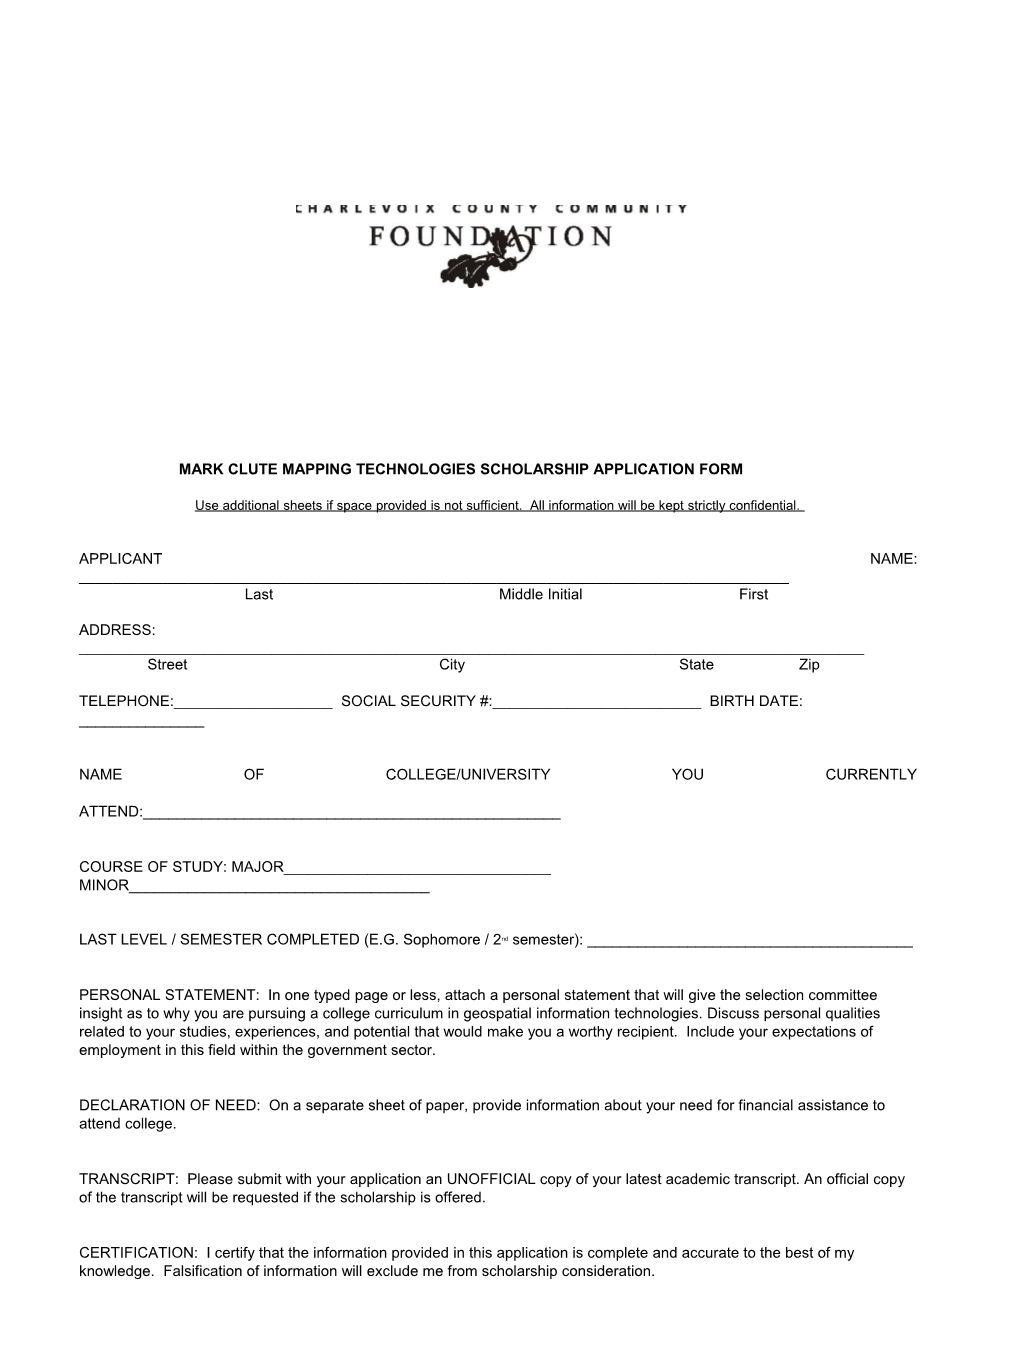 Mark Clute Mapping Technologies Scholarship Application Form